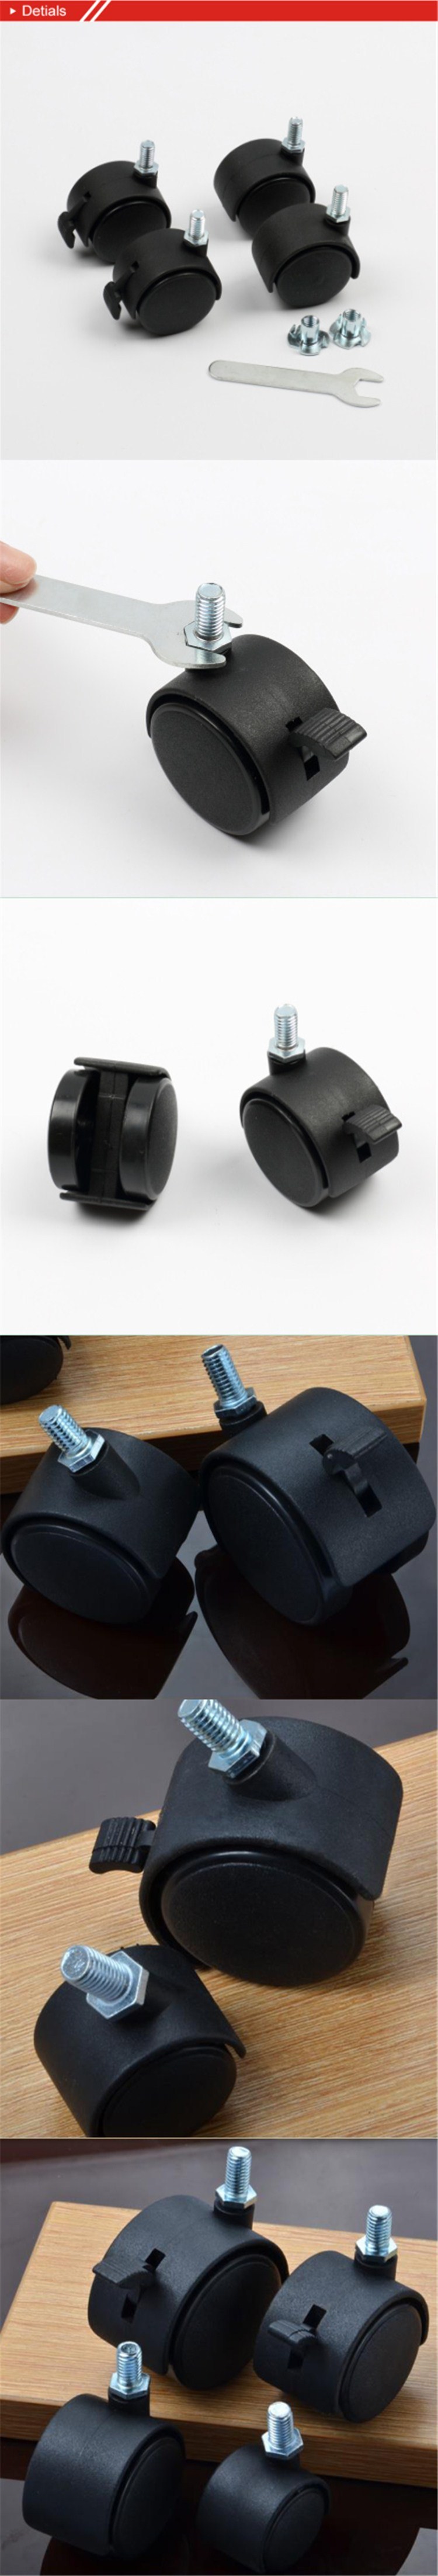 Tk-Jc 1204 Black Small Rubber Office Chair Wheels Silicone Furniture Caster